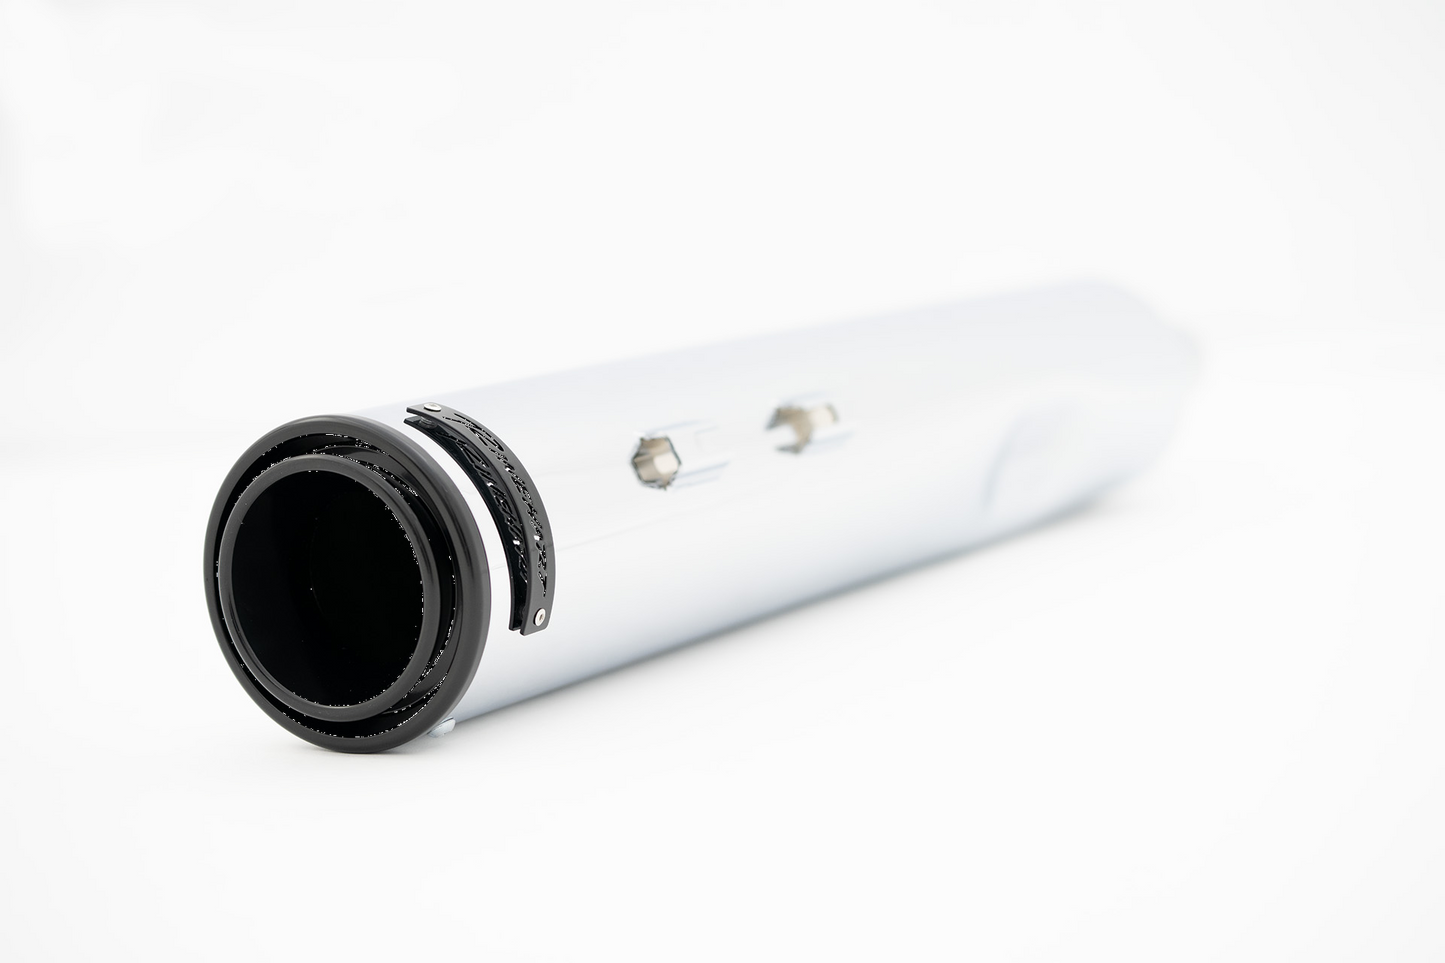 Slip-on silencers of 4.5 "HP45 XL chrome with final PVD Black for HD